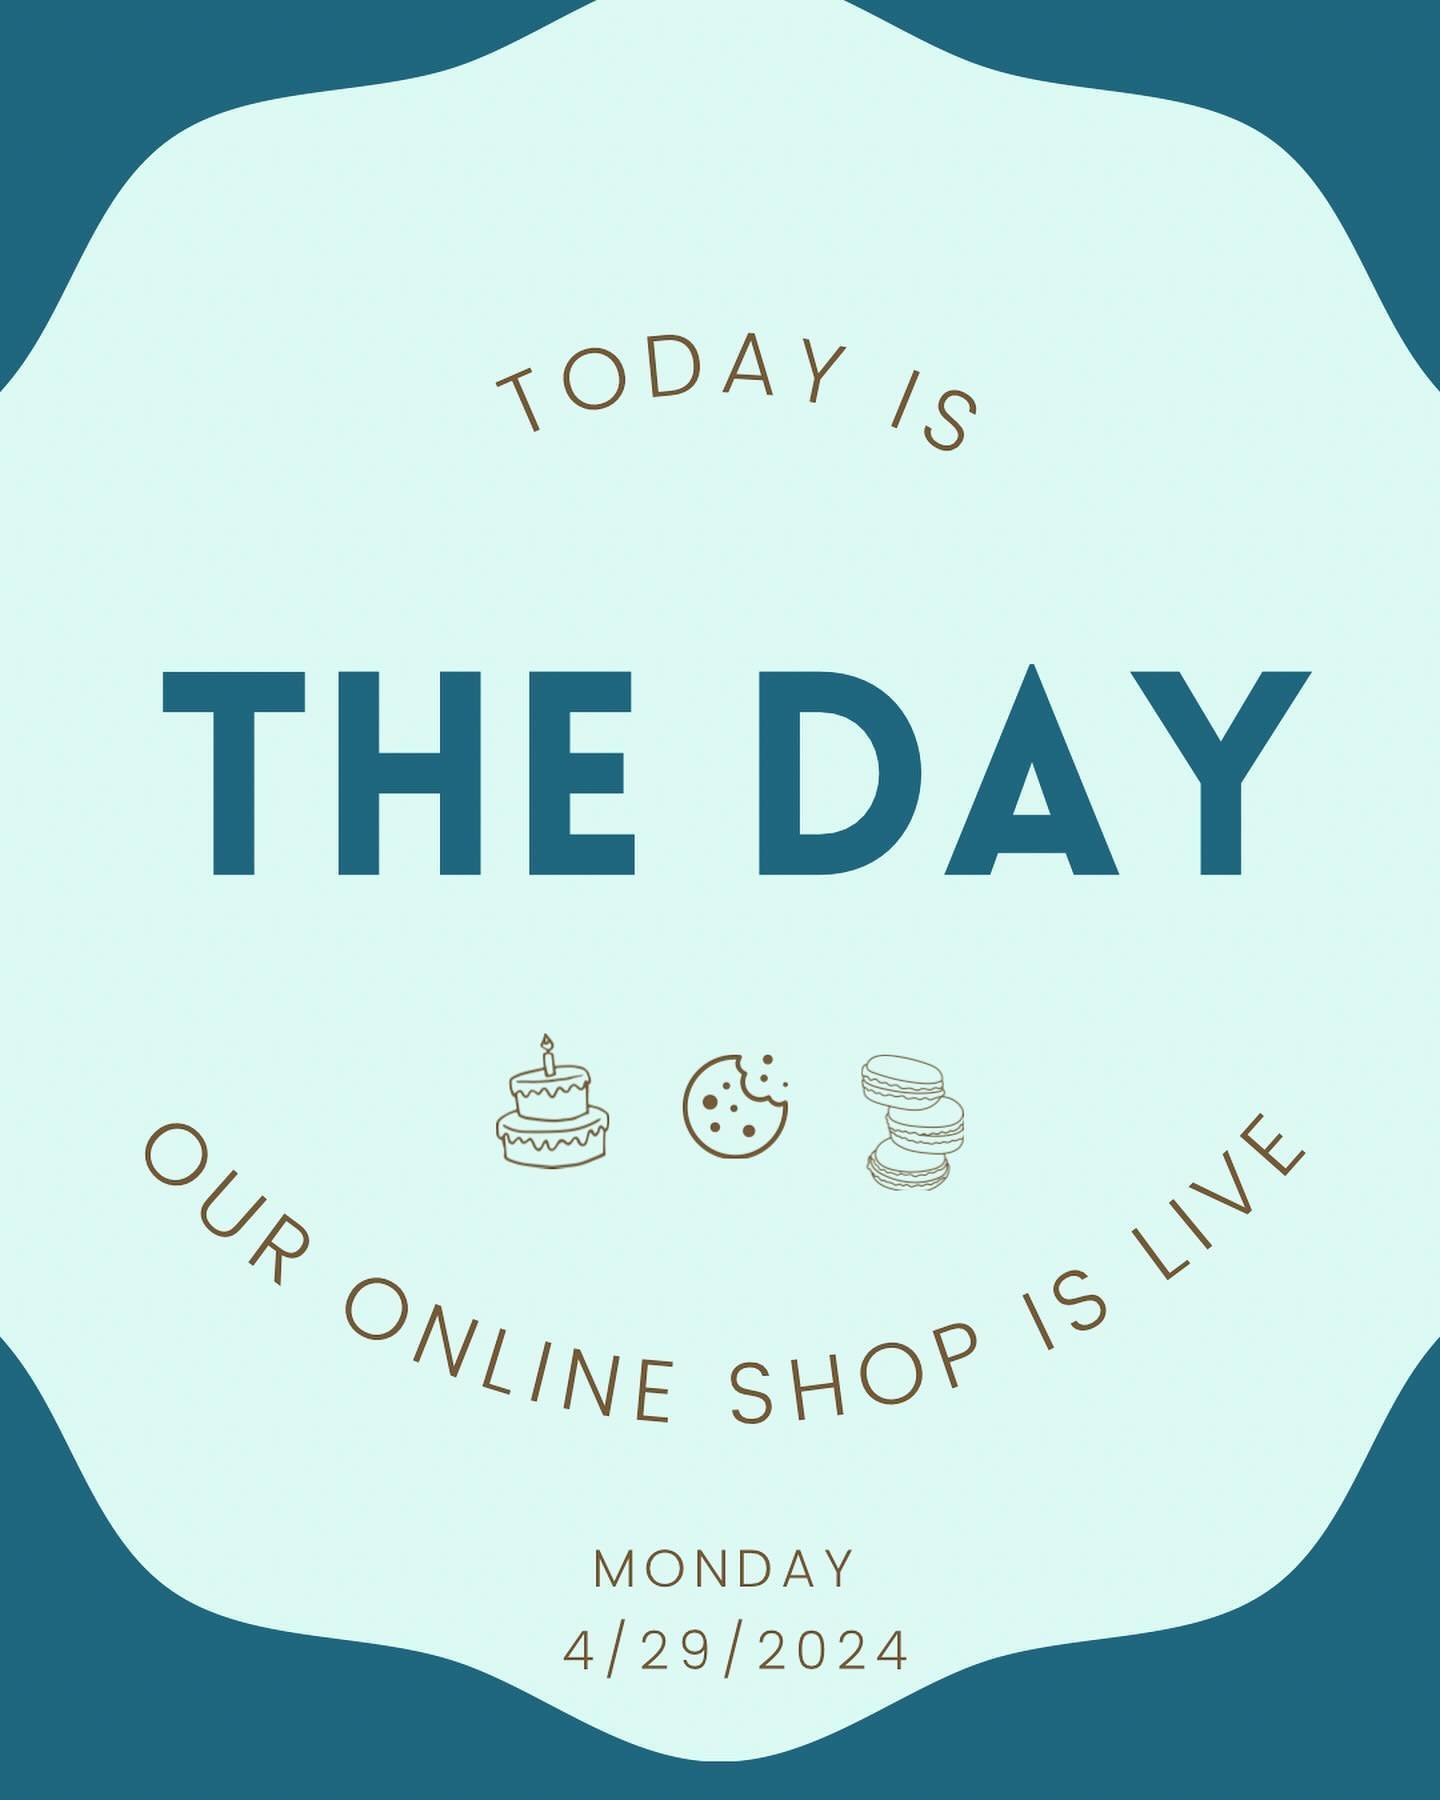 Today is THE DAY!!!!!!

We are LIVE with our Online shop and are beyond ecstatic to finally offer a few of our popular Sweet Treats to our customers near and far. Just Click the Link in Bio or visit us directly at www.capebatter.com and use our Navig